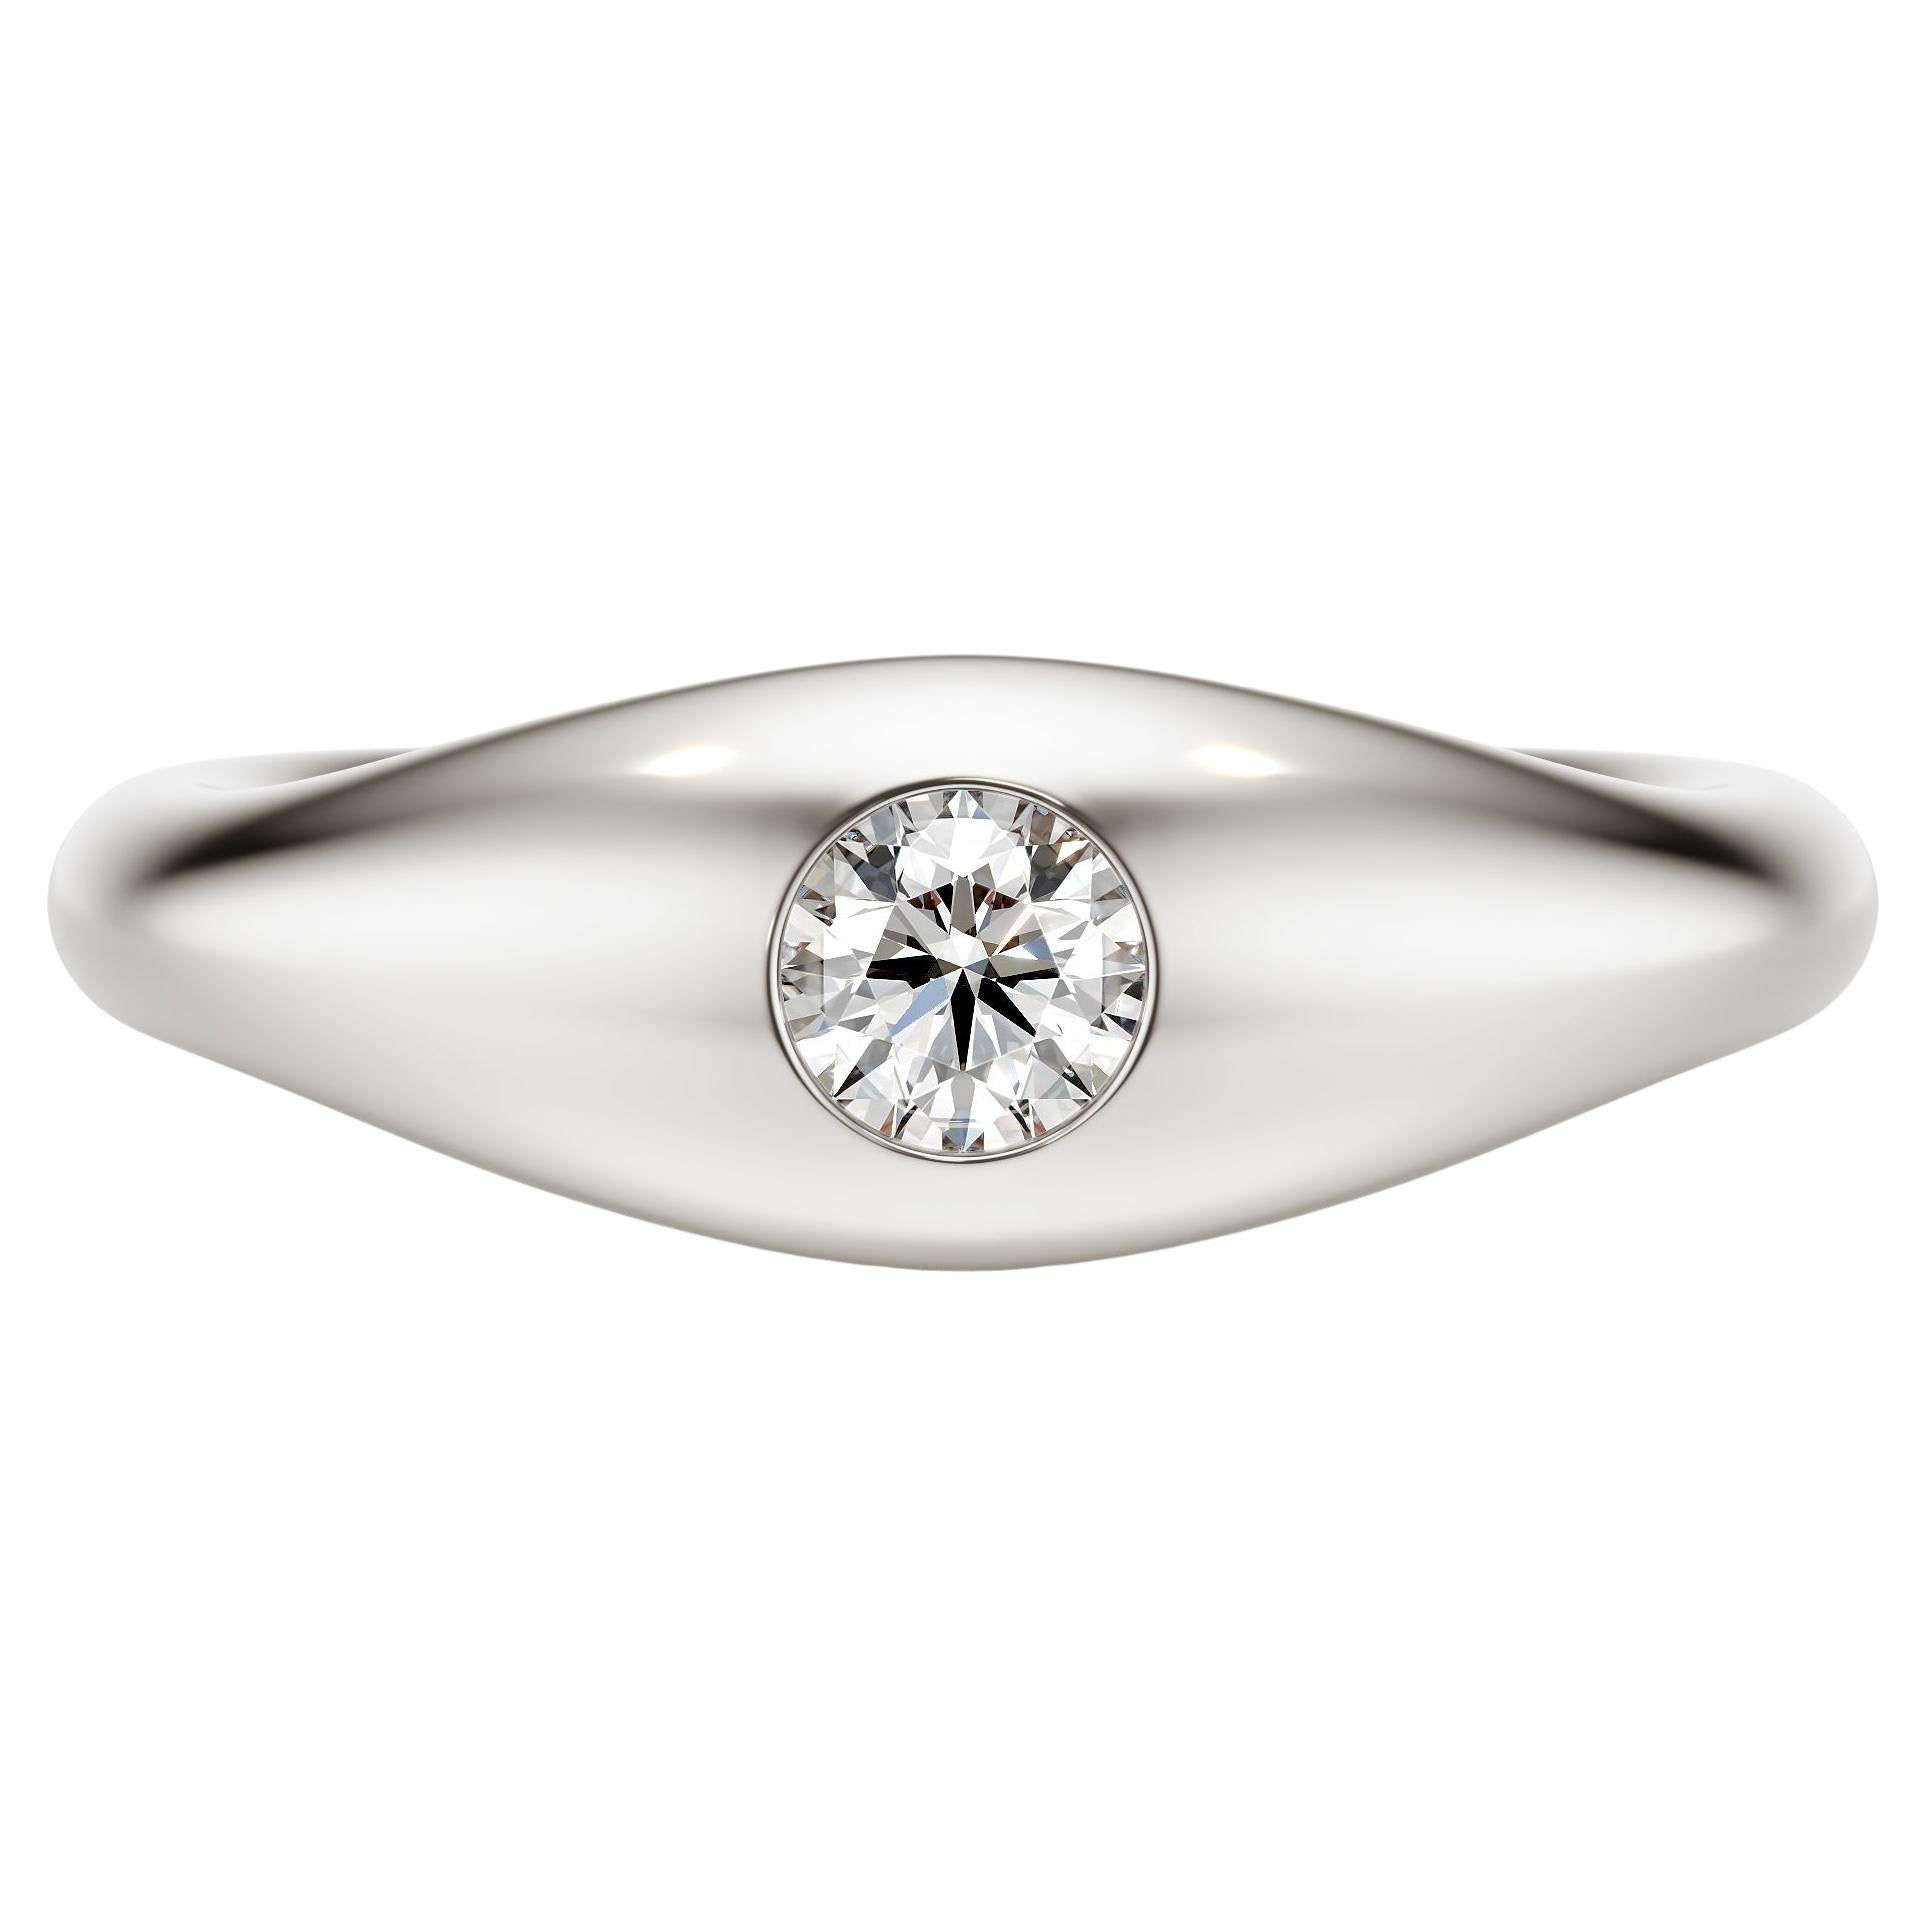 Ruth Nyc Lun Ring, 14k White Gold and Diamond